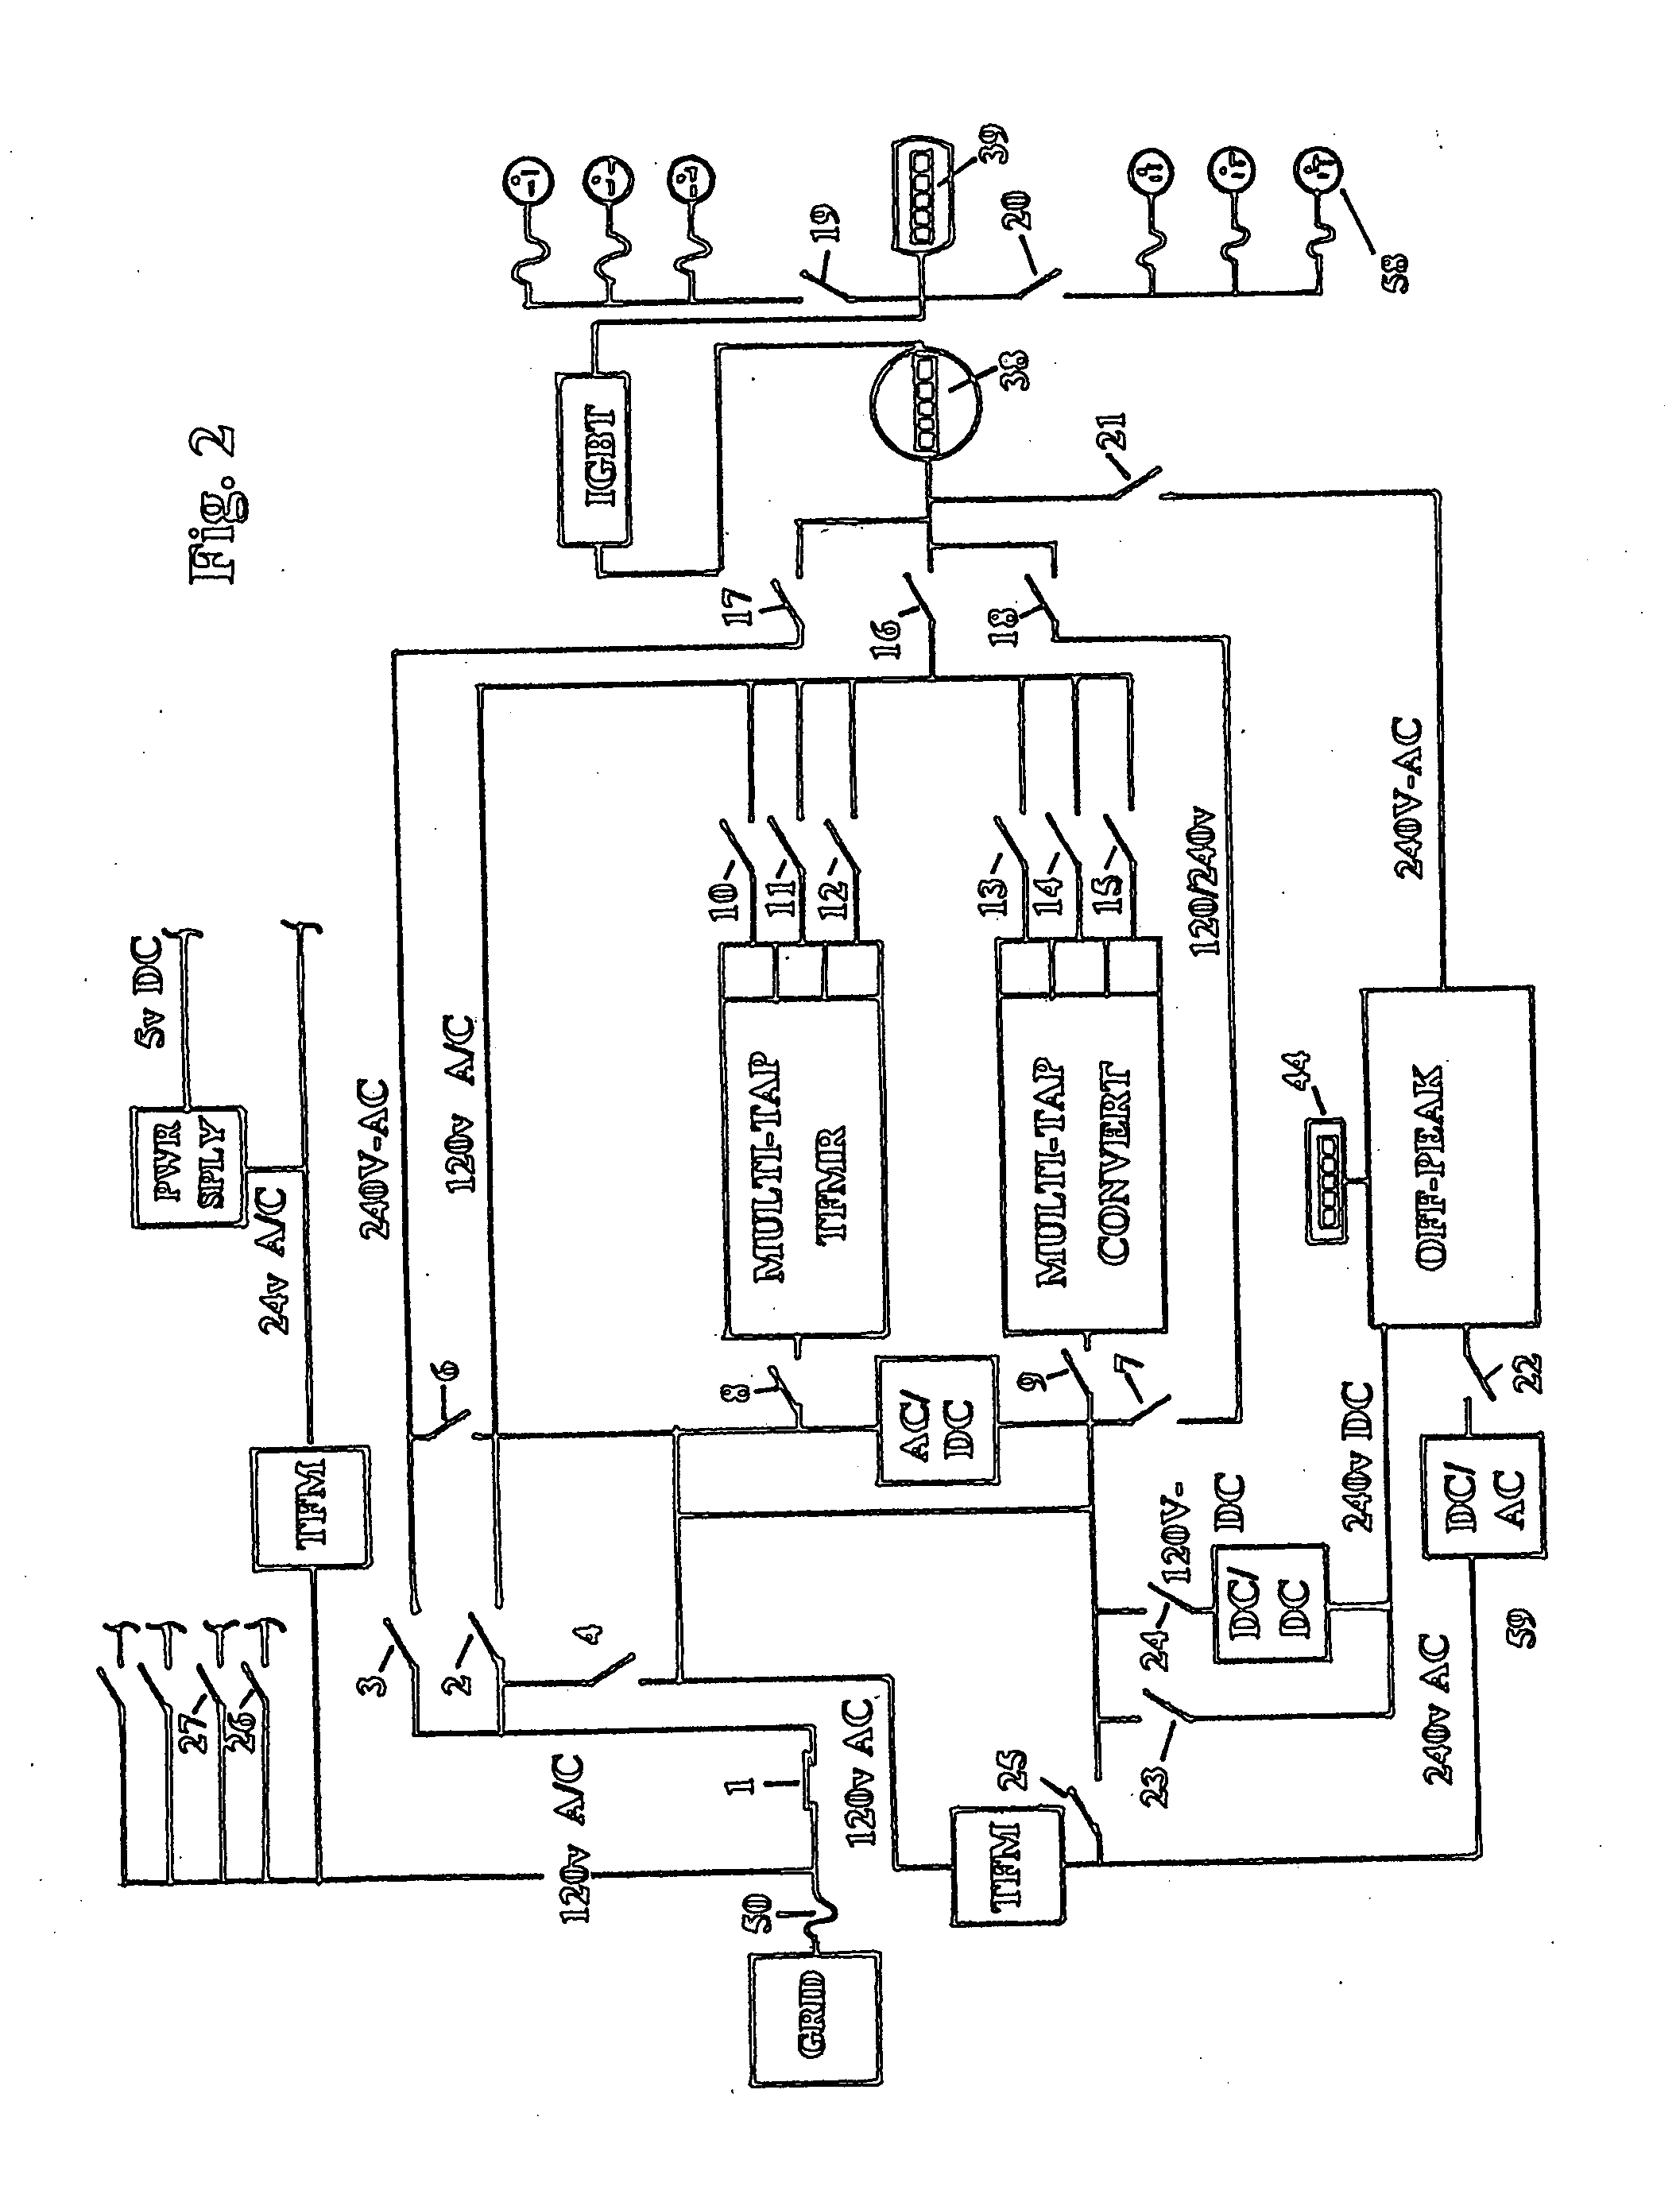 Method for pay-per-use, self-service charging of electric automobiles